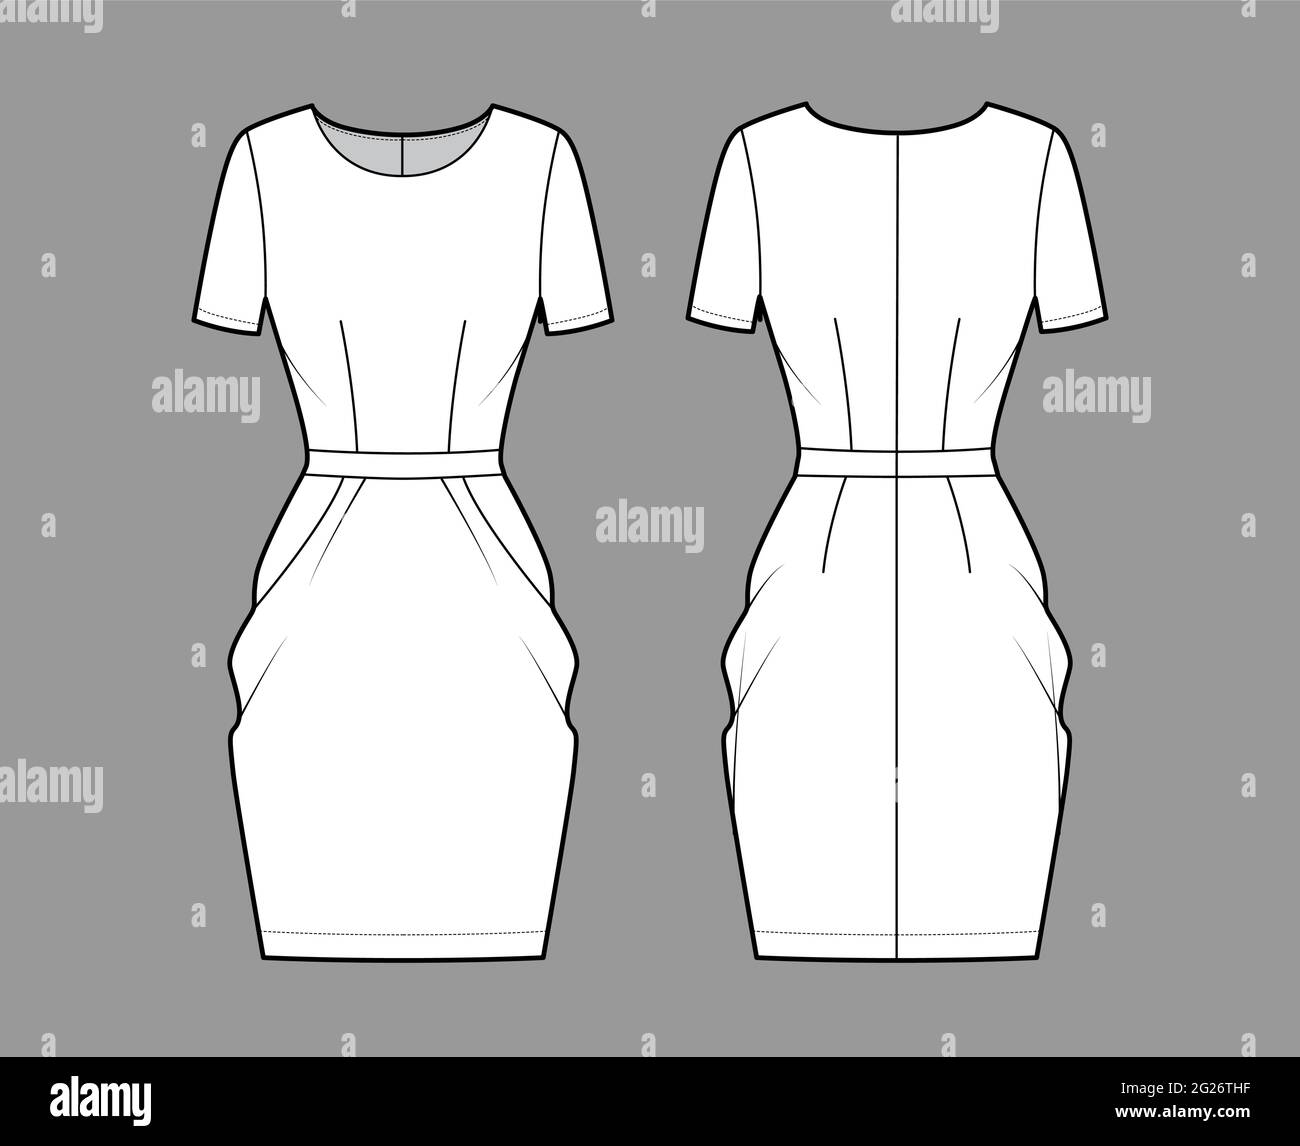 Dress tulip technical fashion illustration with short sleeves, fitted ...